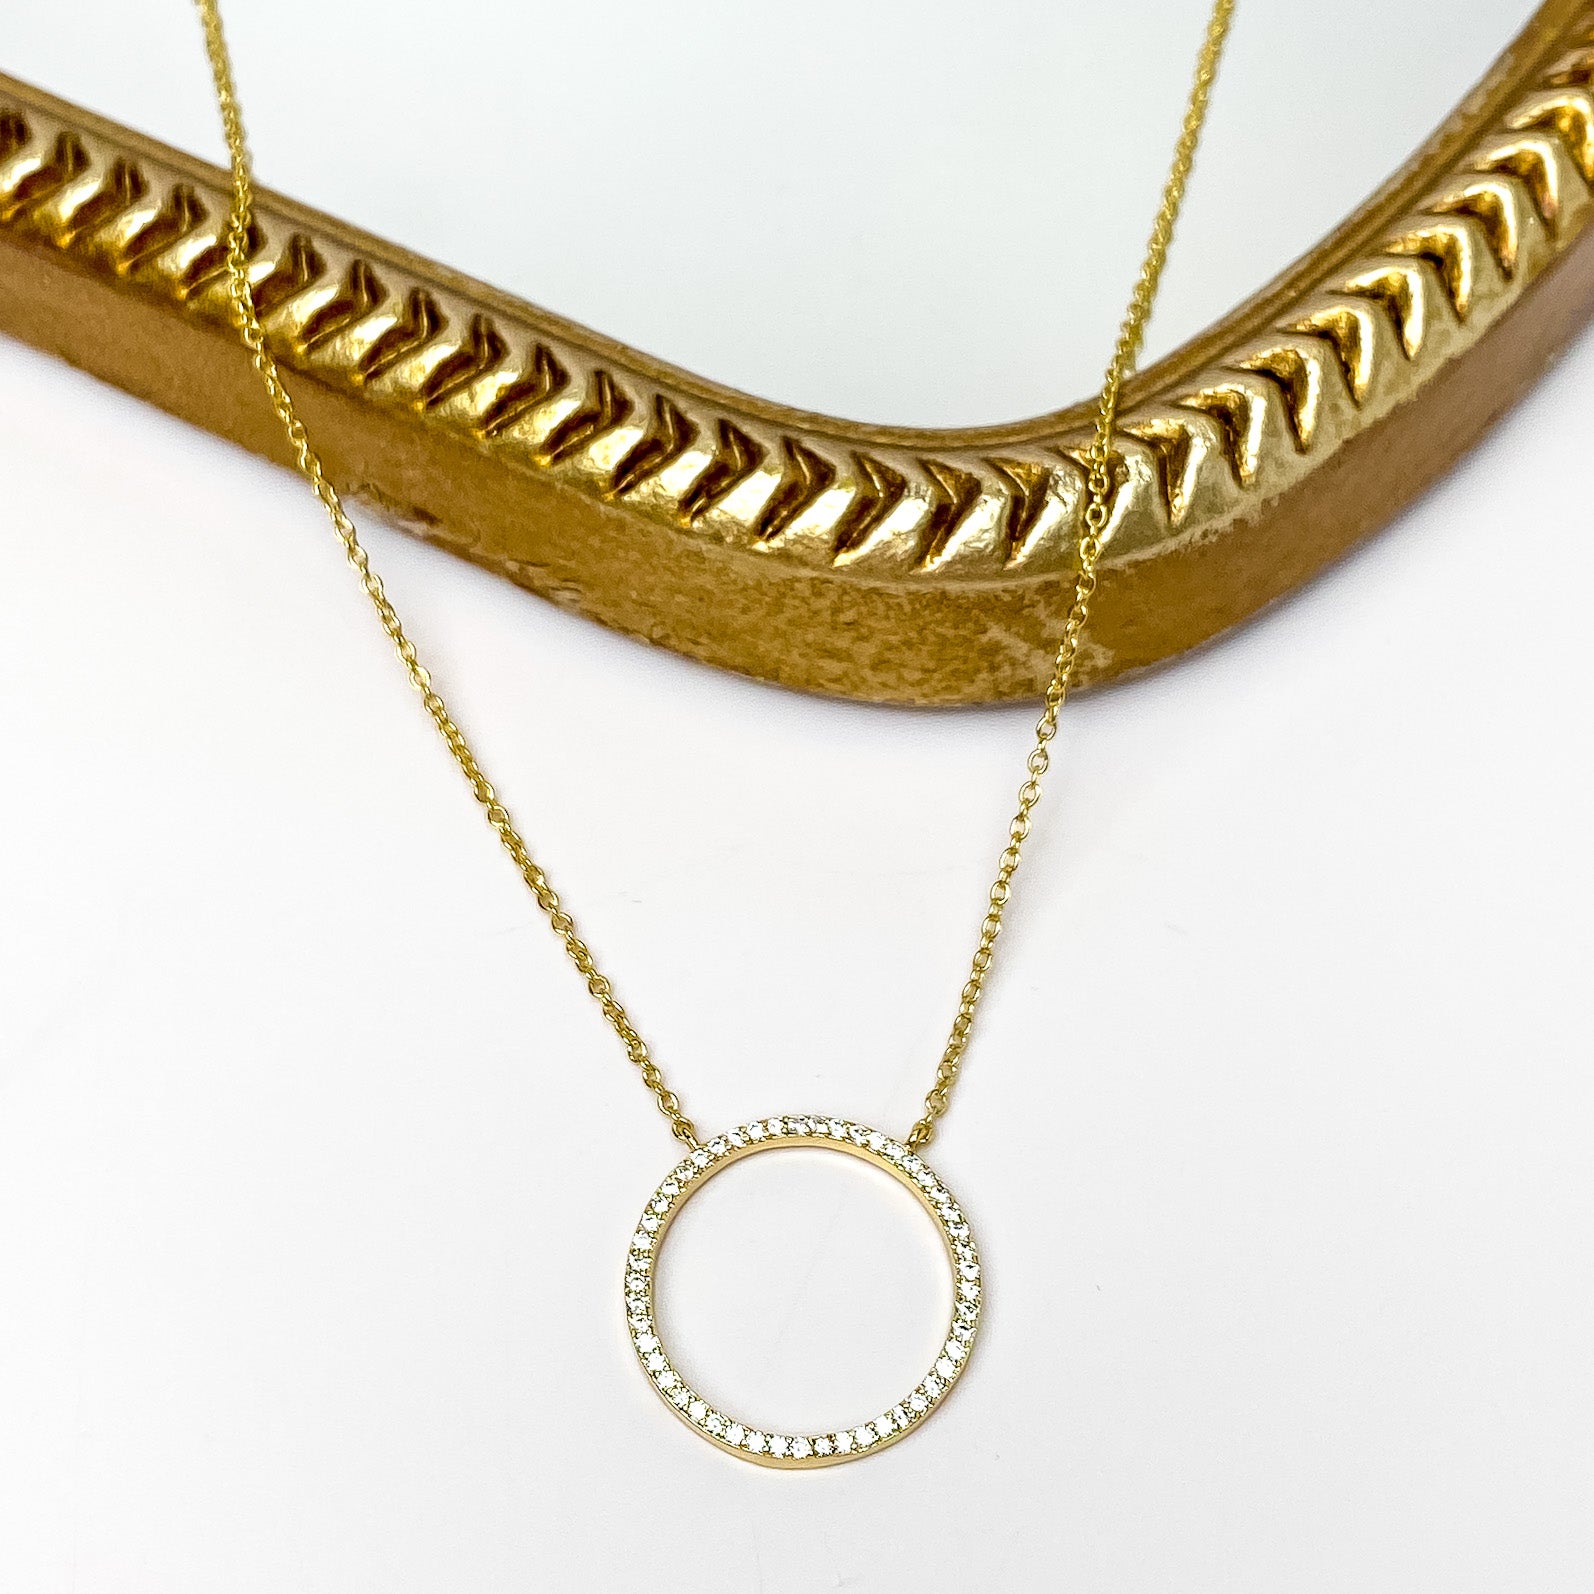 Inner Circle Chain Necklace with CZ Crystals in Gold Tone - Giddy Up Glamour Boutique